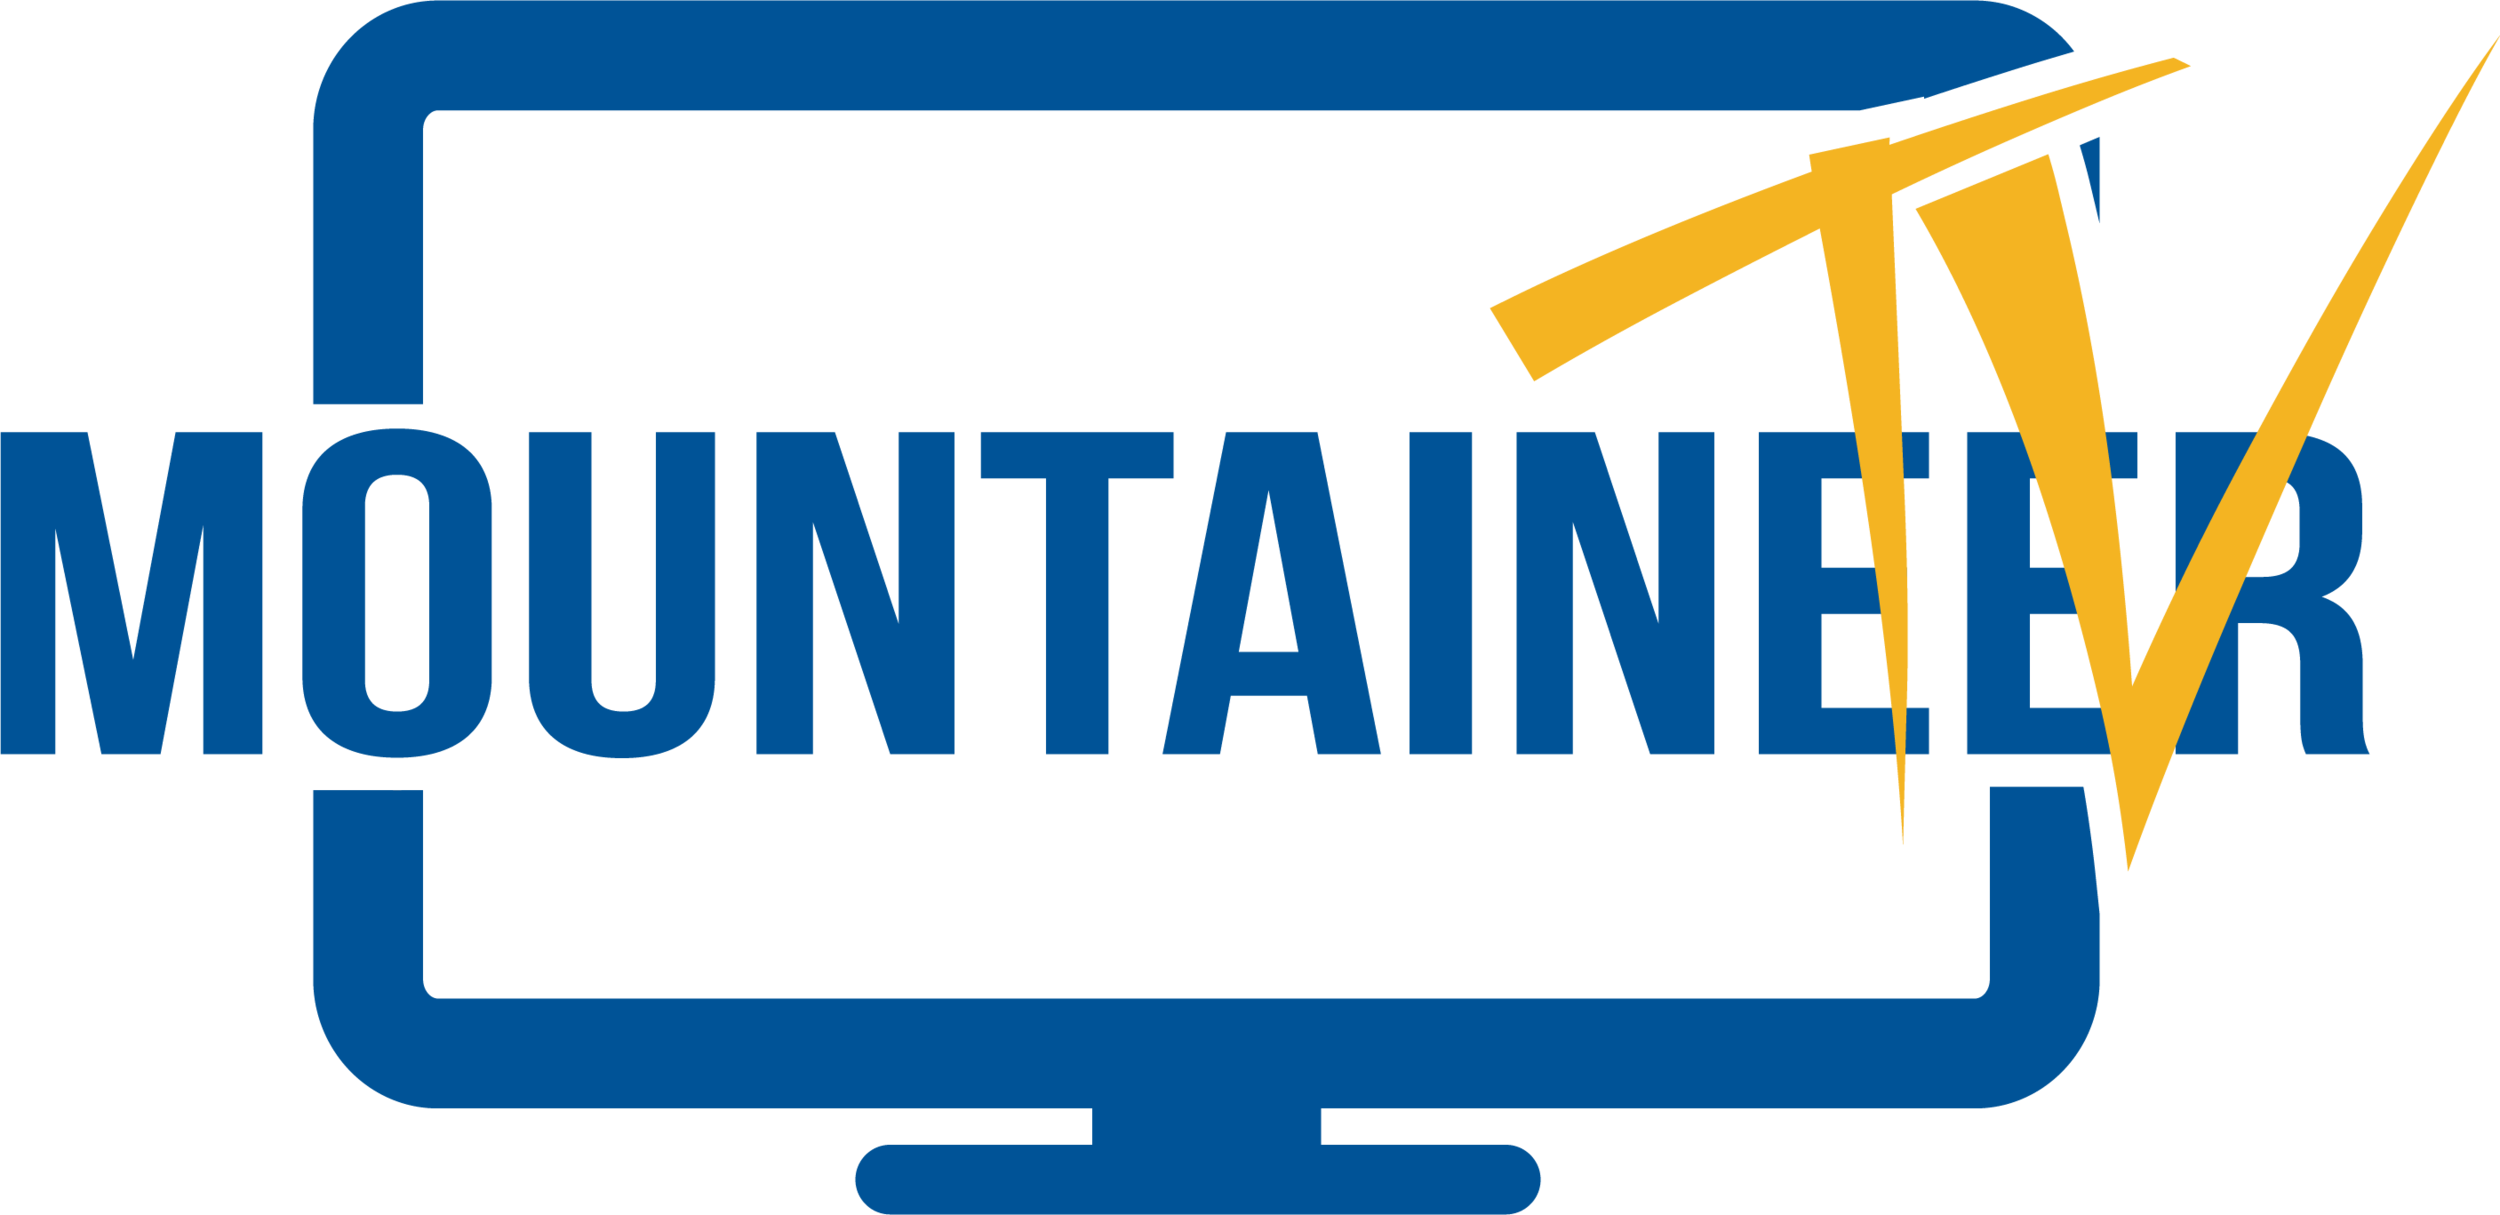 Mountaineer TV Logo Simple.png